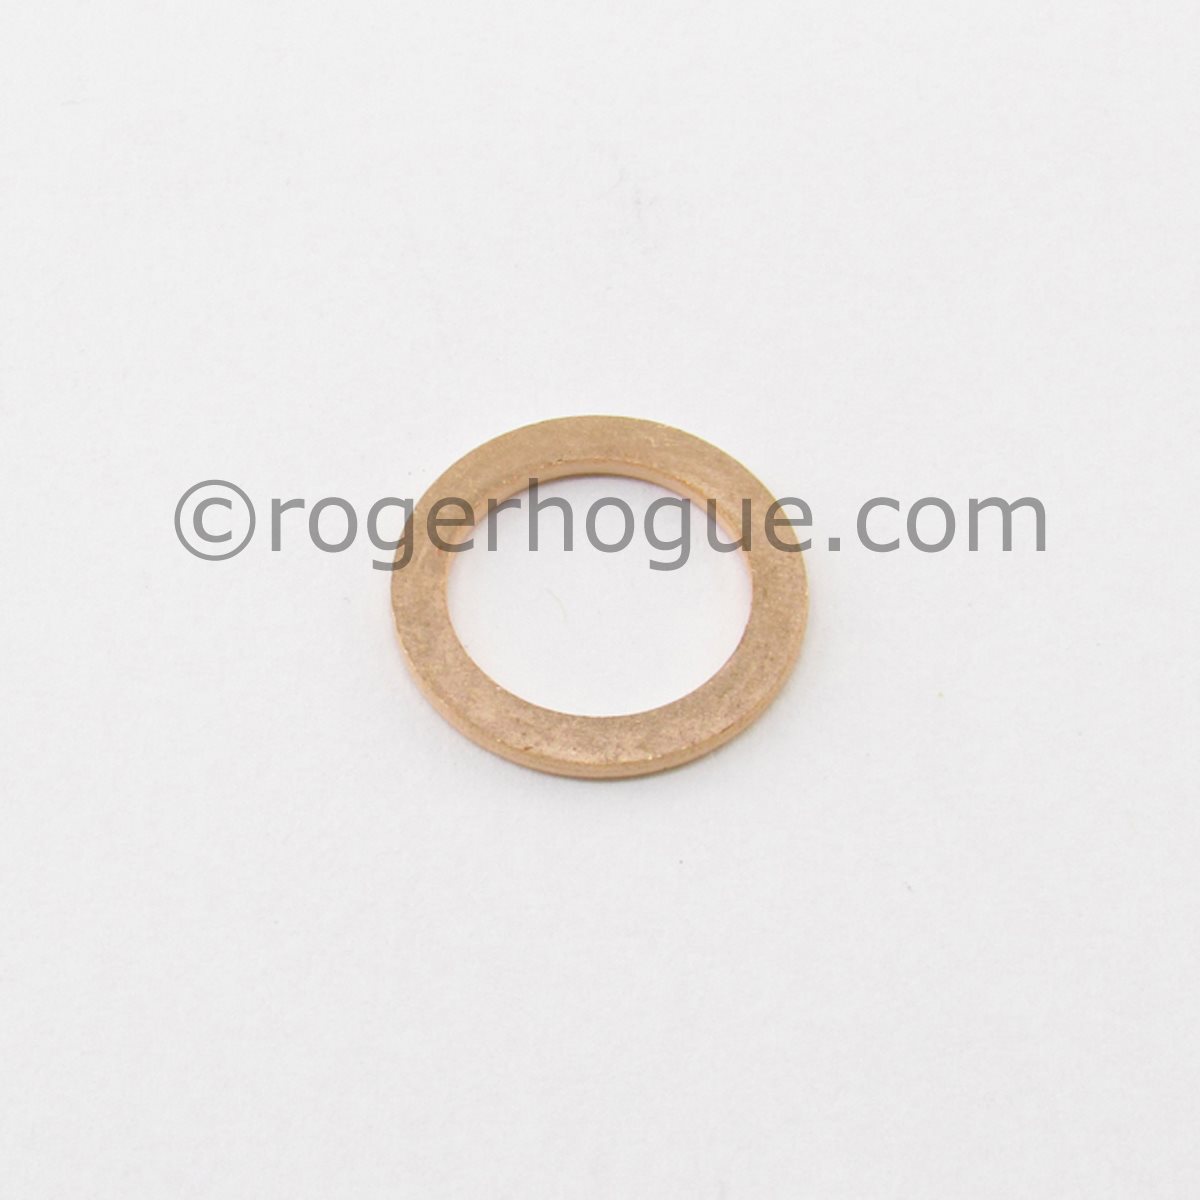 16MM COPPER WASHER FOR 3B3B